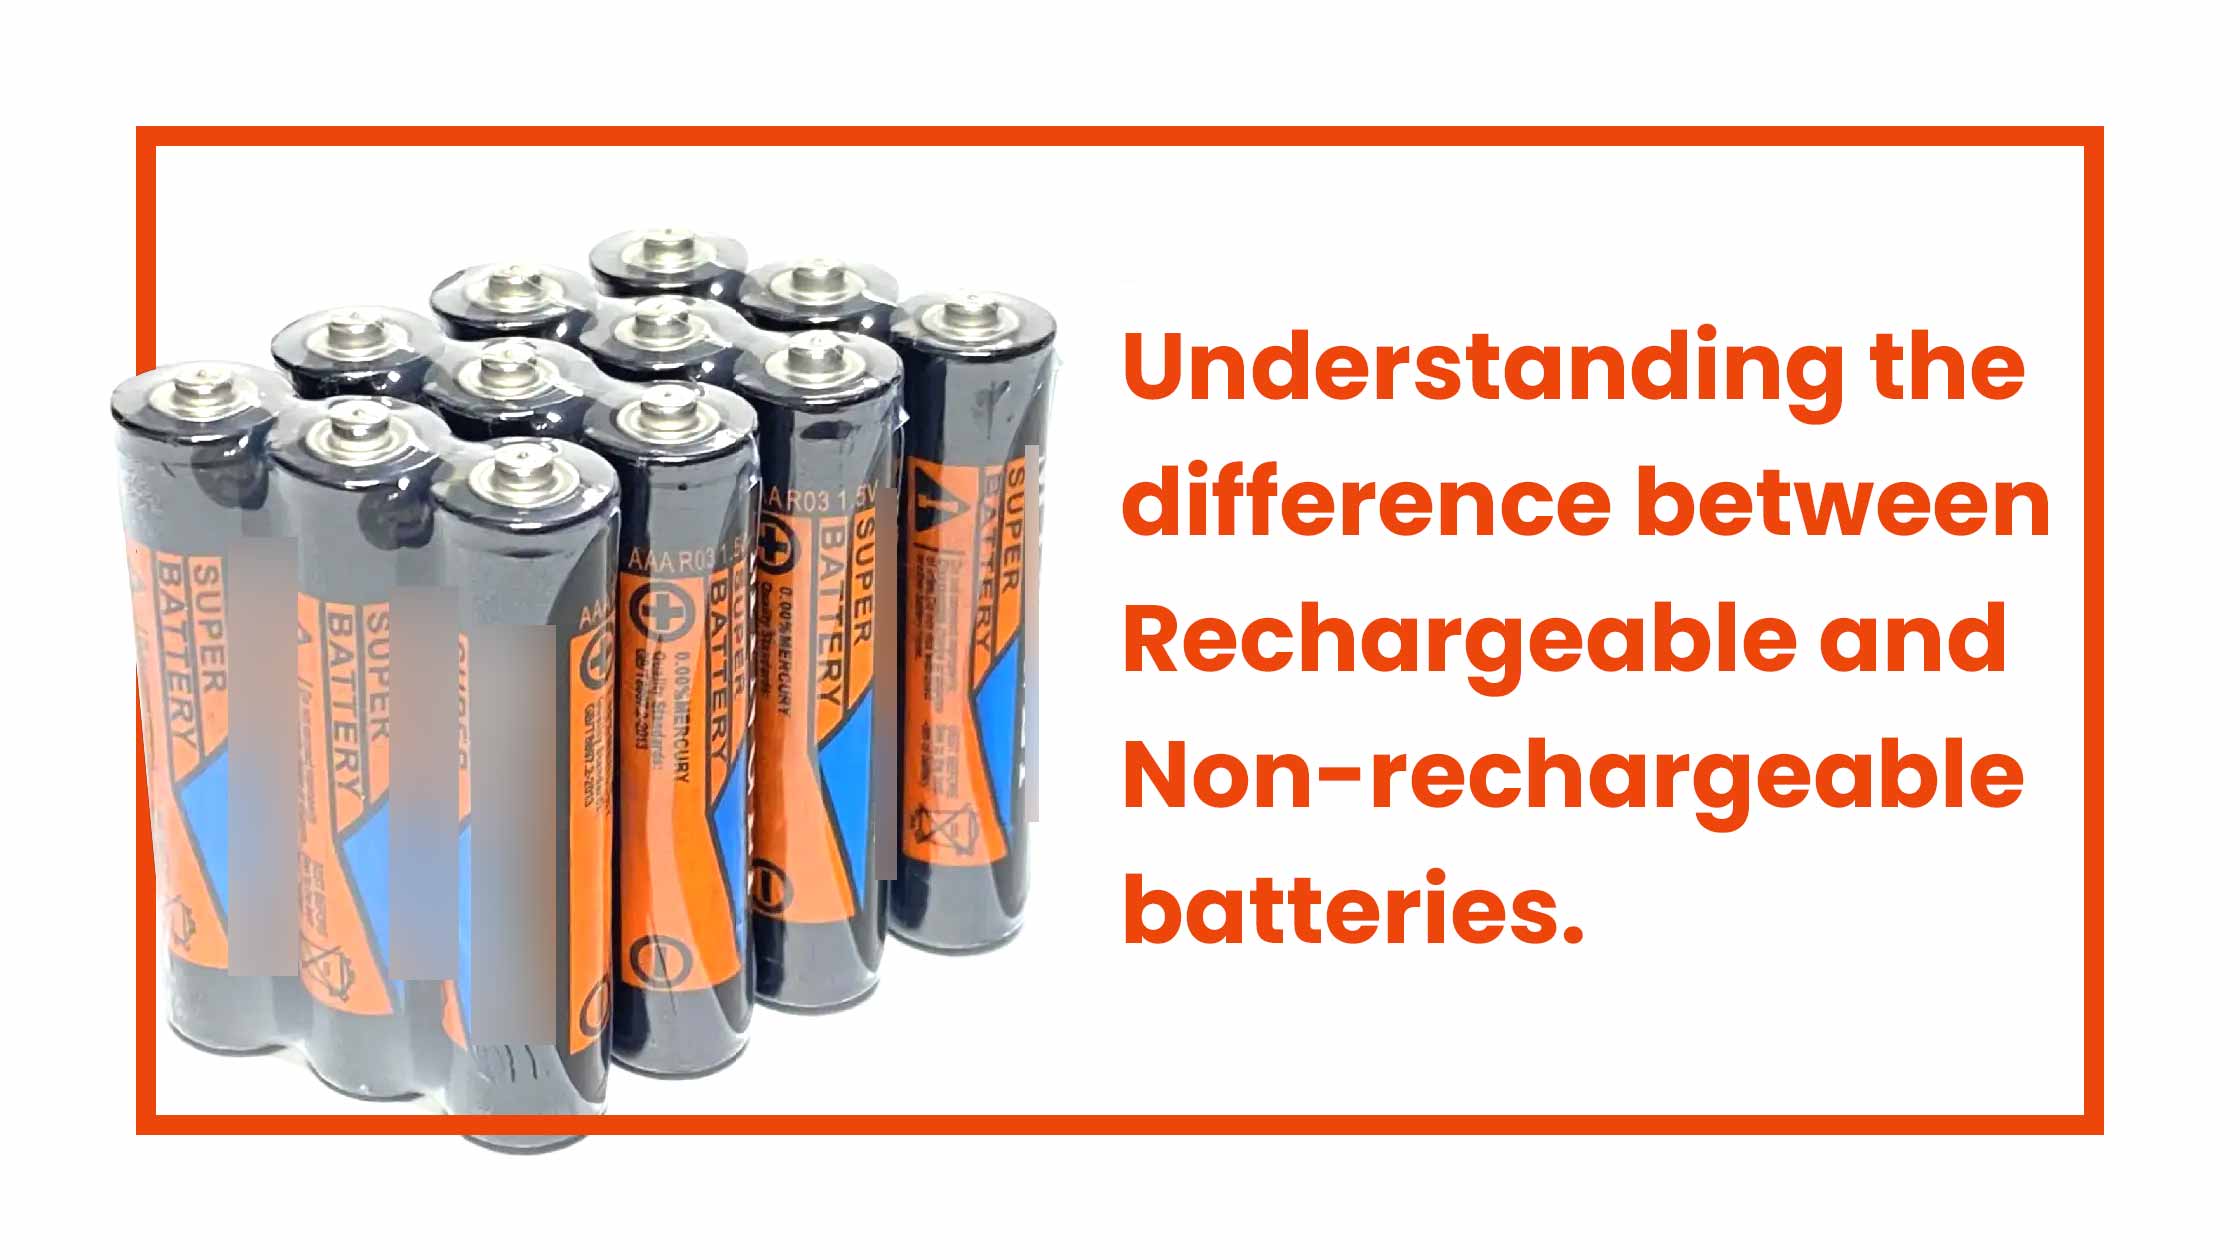 Understanding the difference between rechargeable and non-rechargeable batteries, Will regular AA batteries work in solar lights?